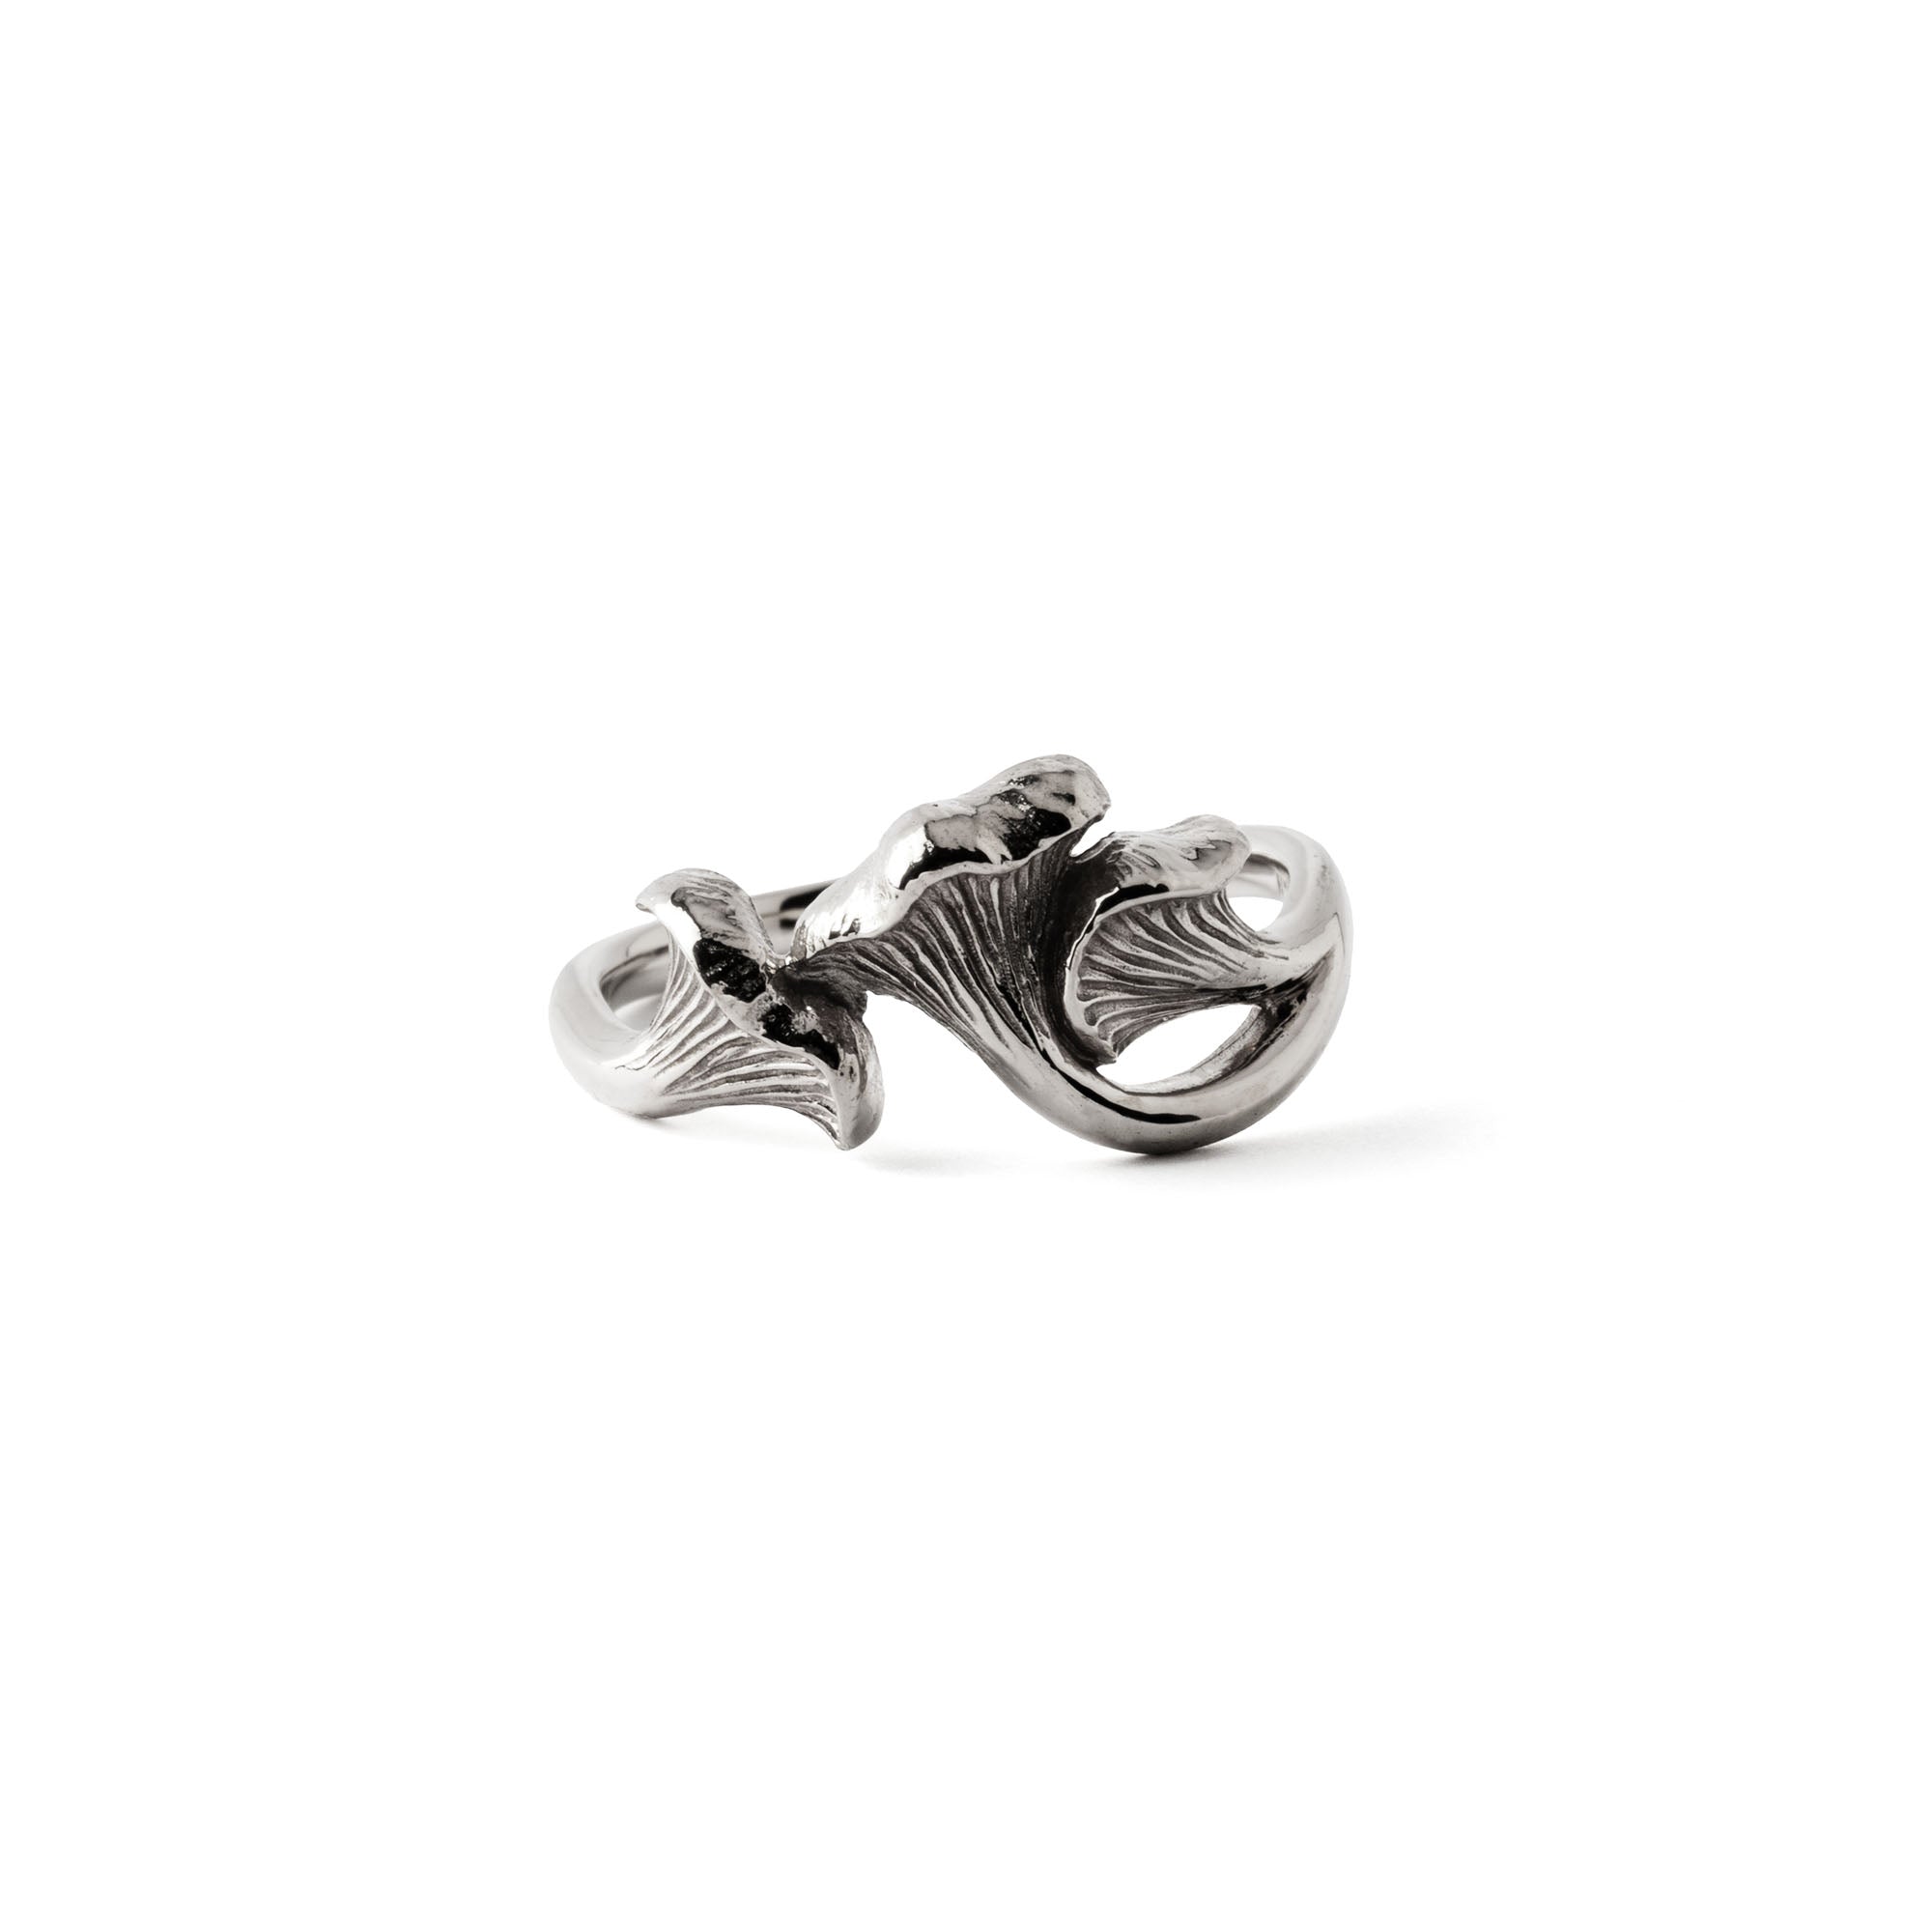 Chanterelle Mushroom Silver Ring frontal view